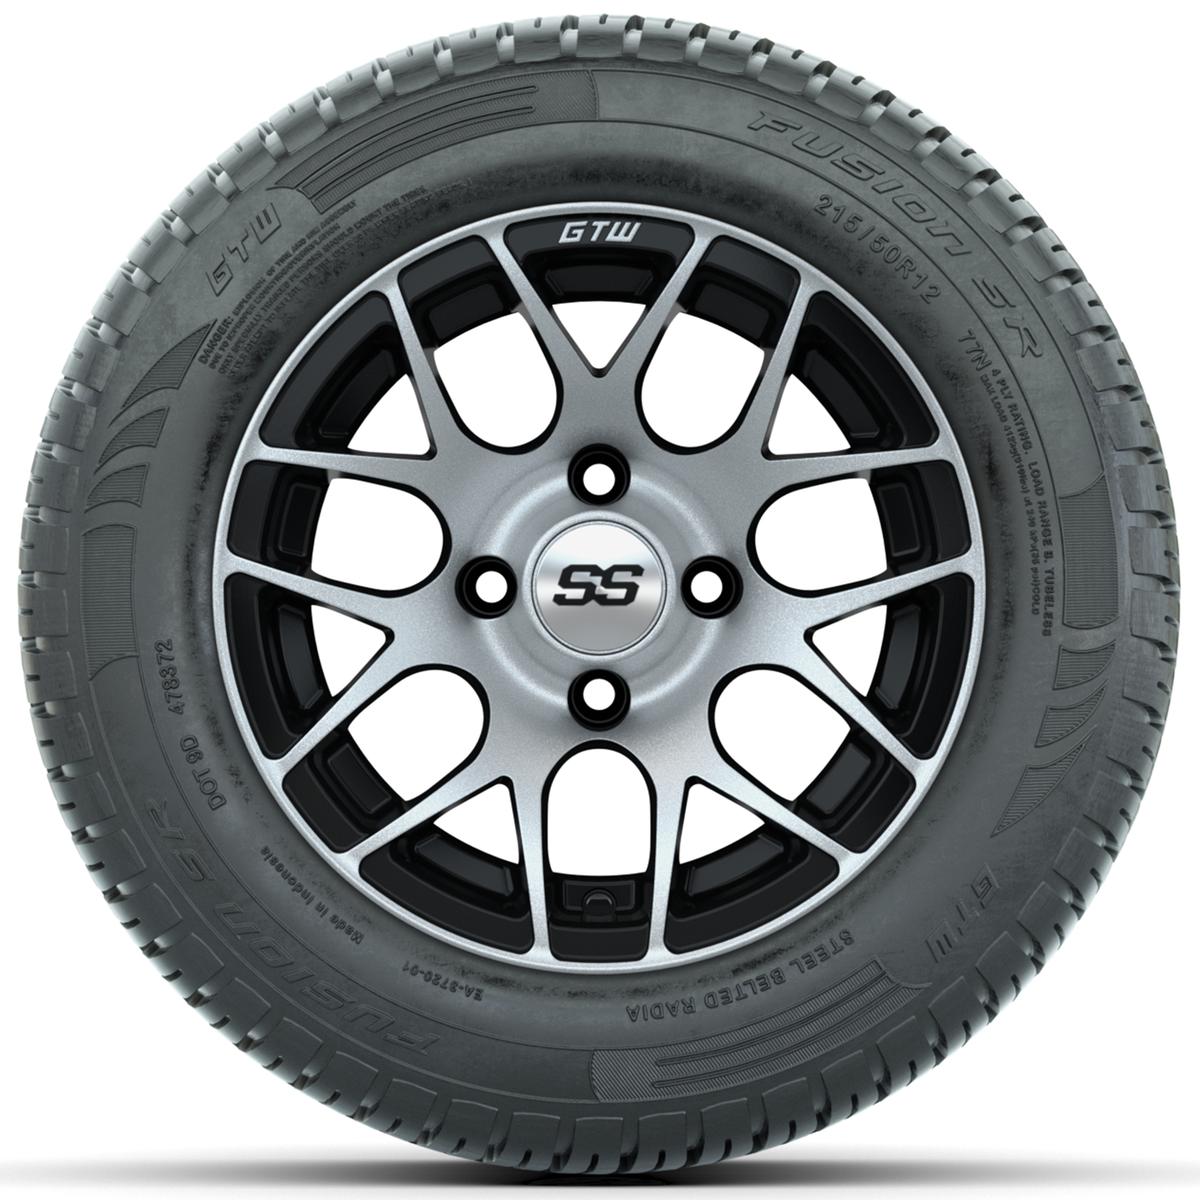 Set of (4) 12 in GTW Pursuit Wheels with 215/50-R12 Fusion S/R Street Tires